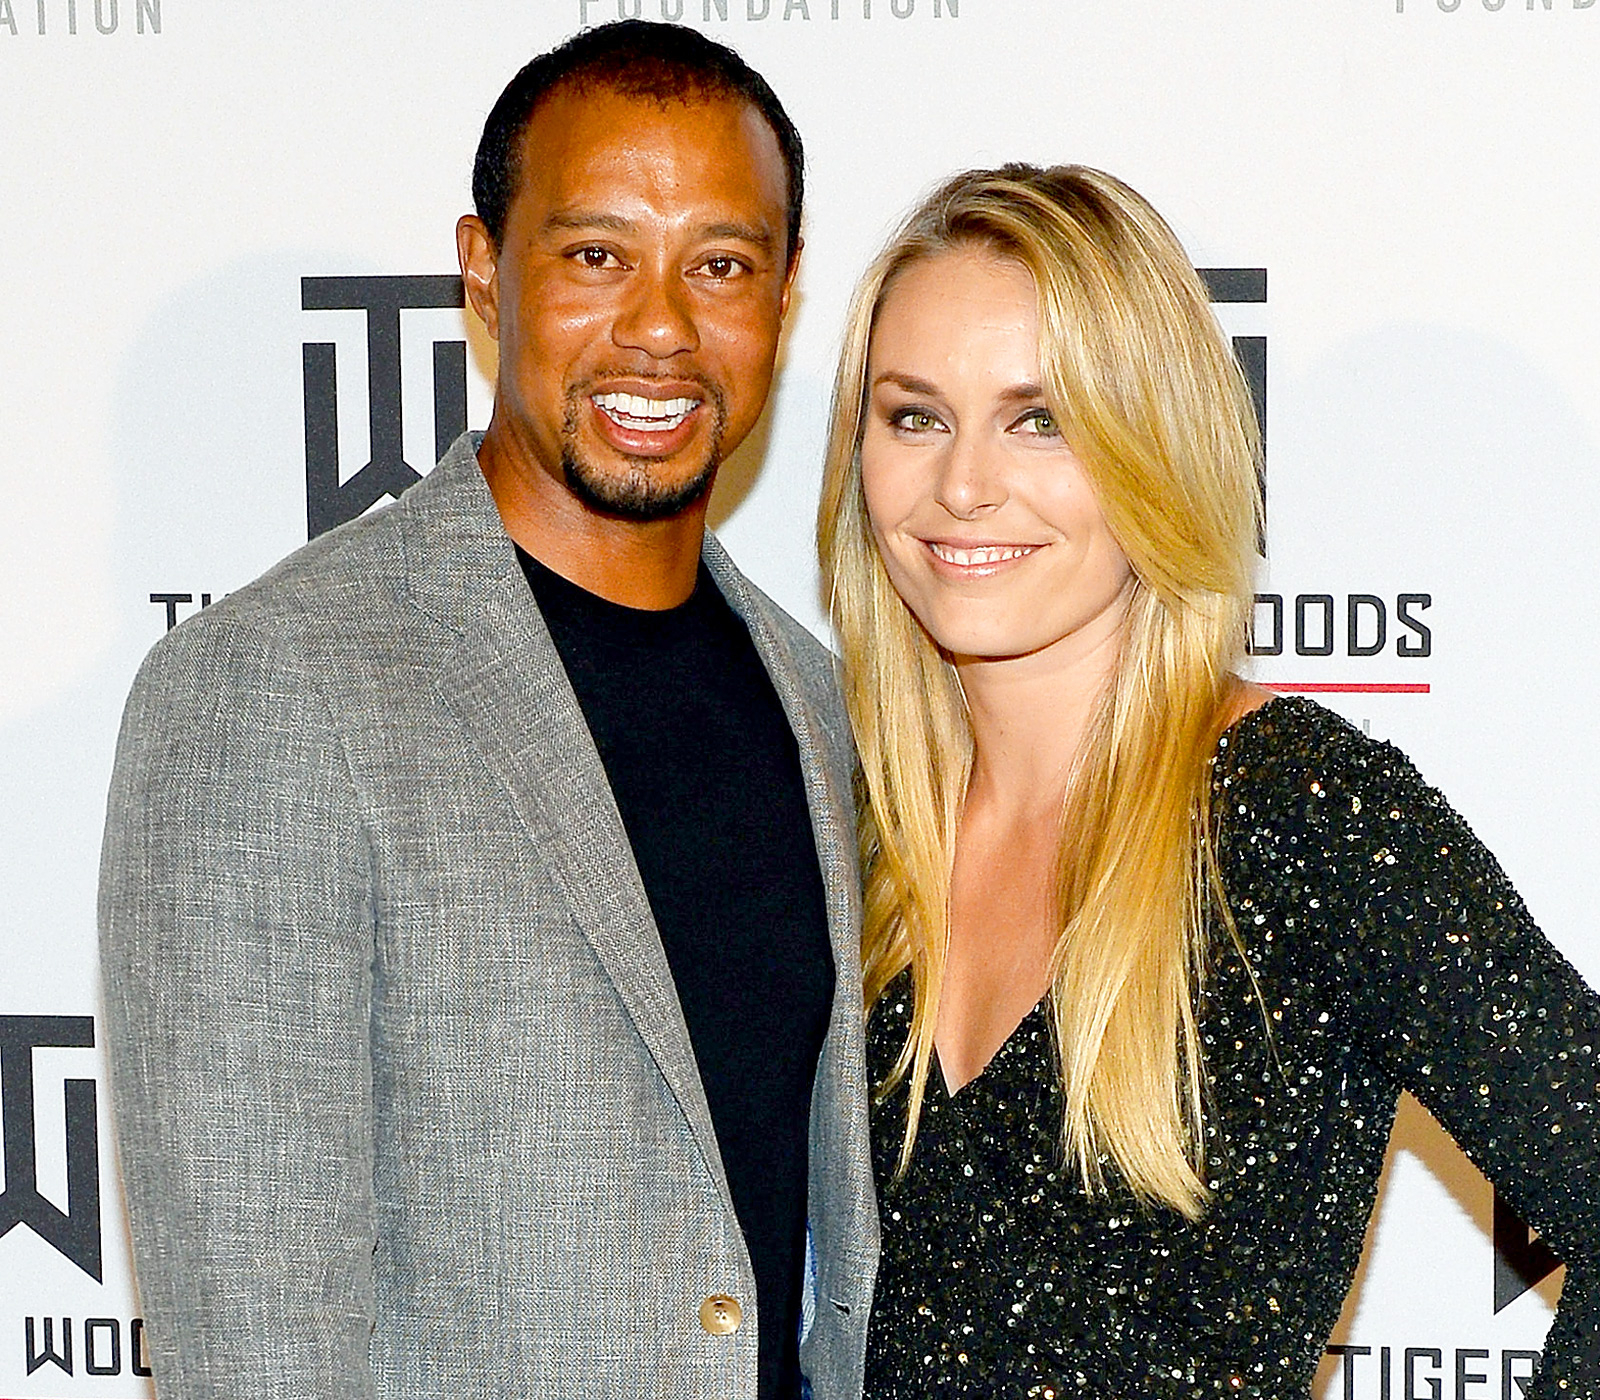 Lindsey Vonn Responds to Leaked Nude Photos of Her and Tiger Woods picture